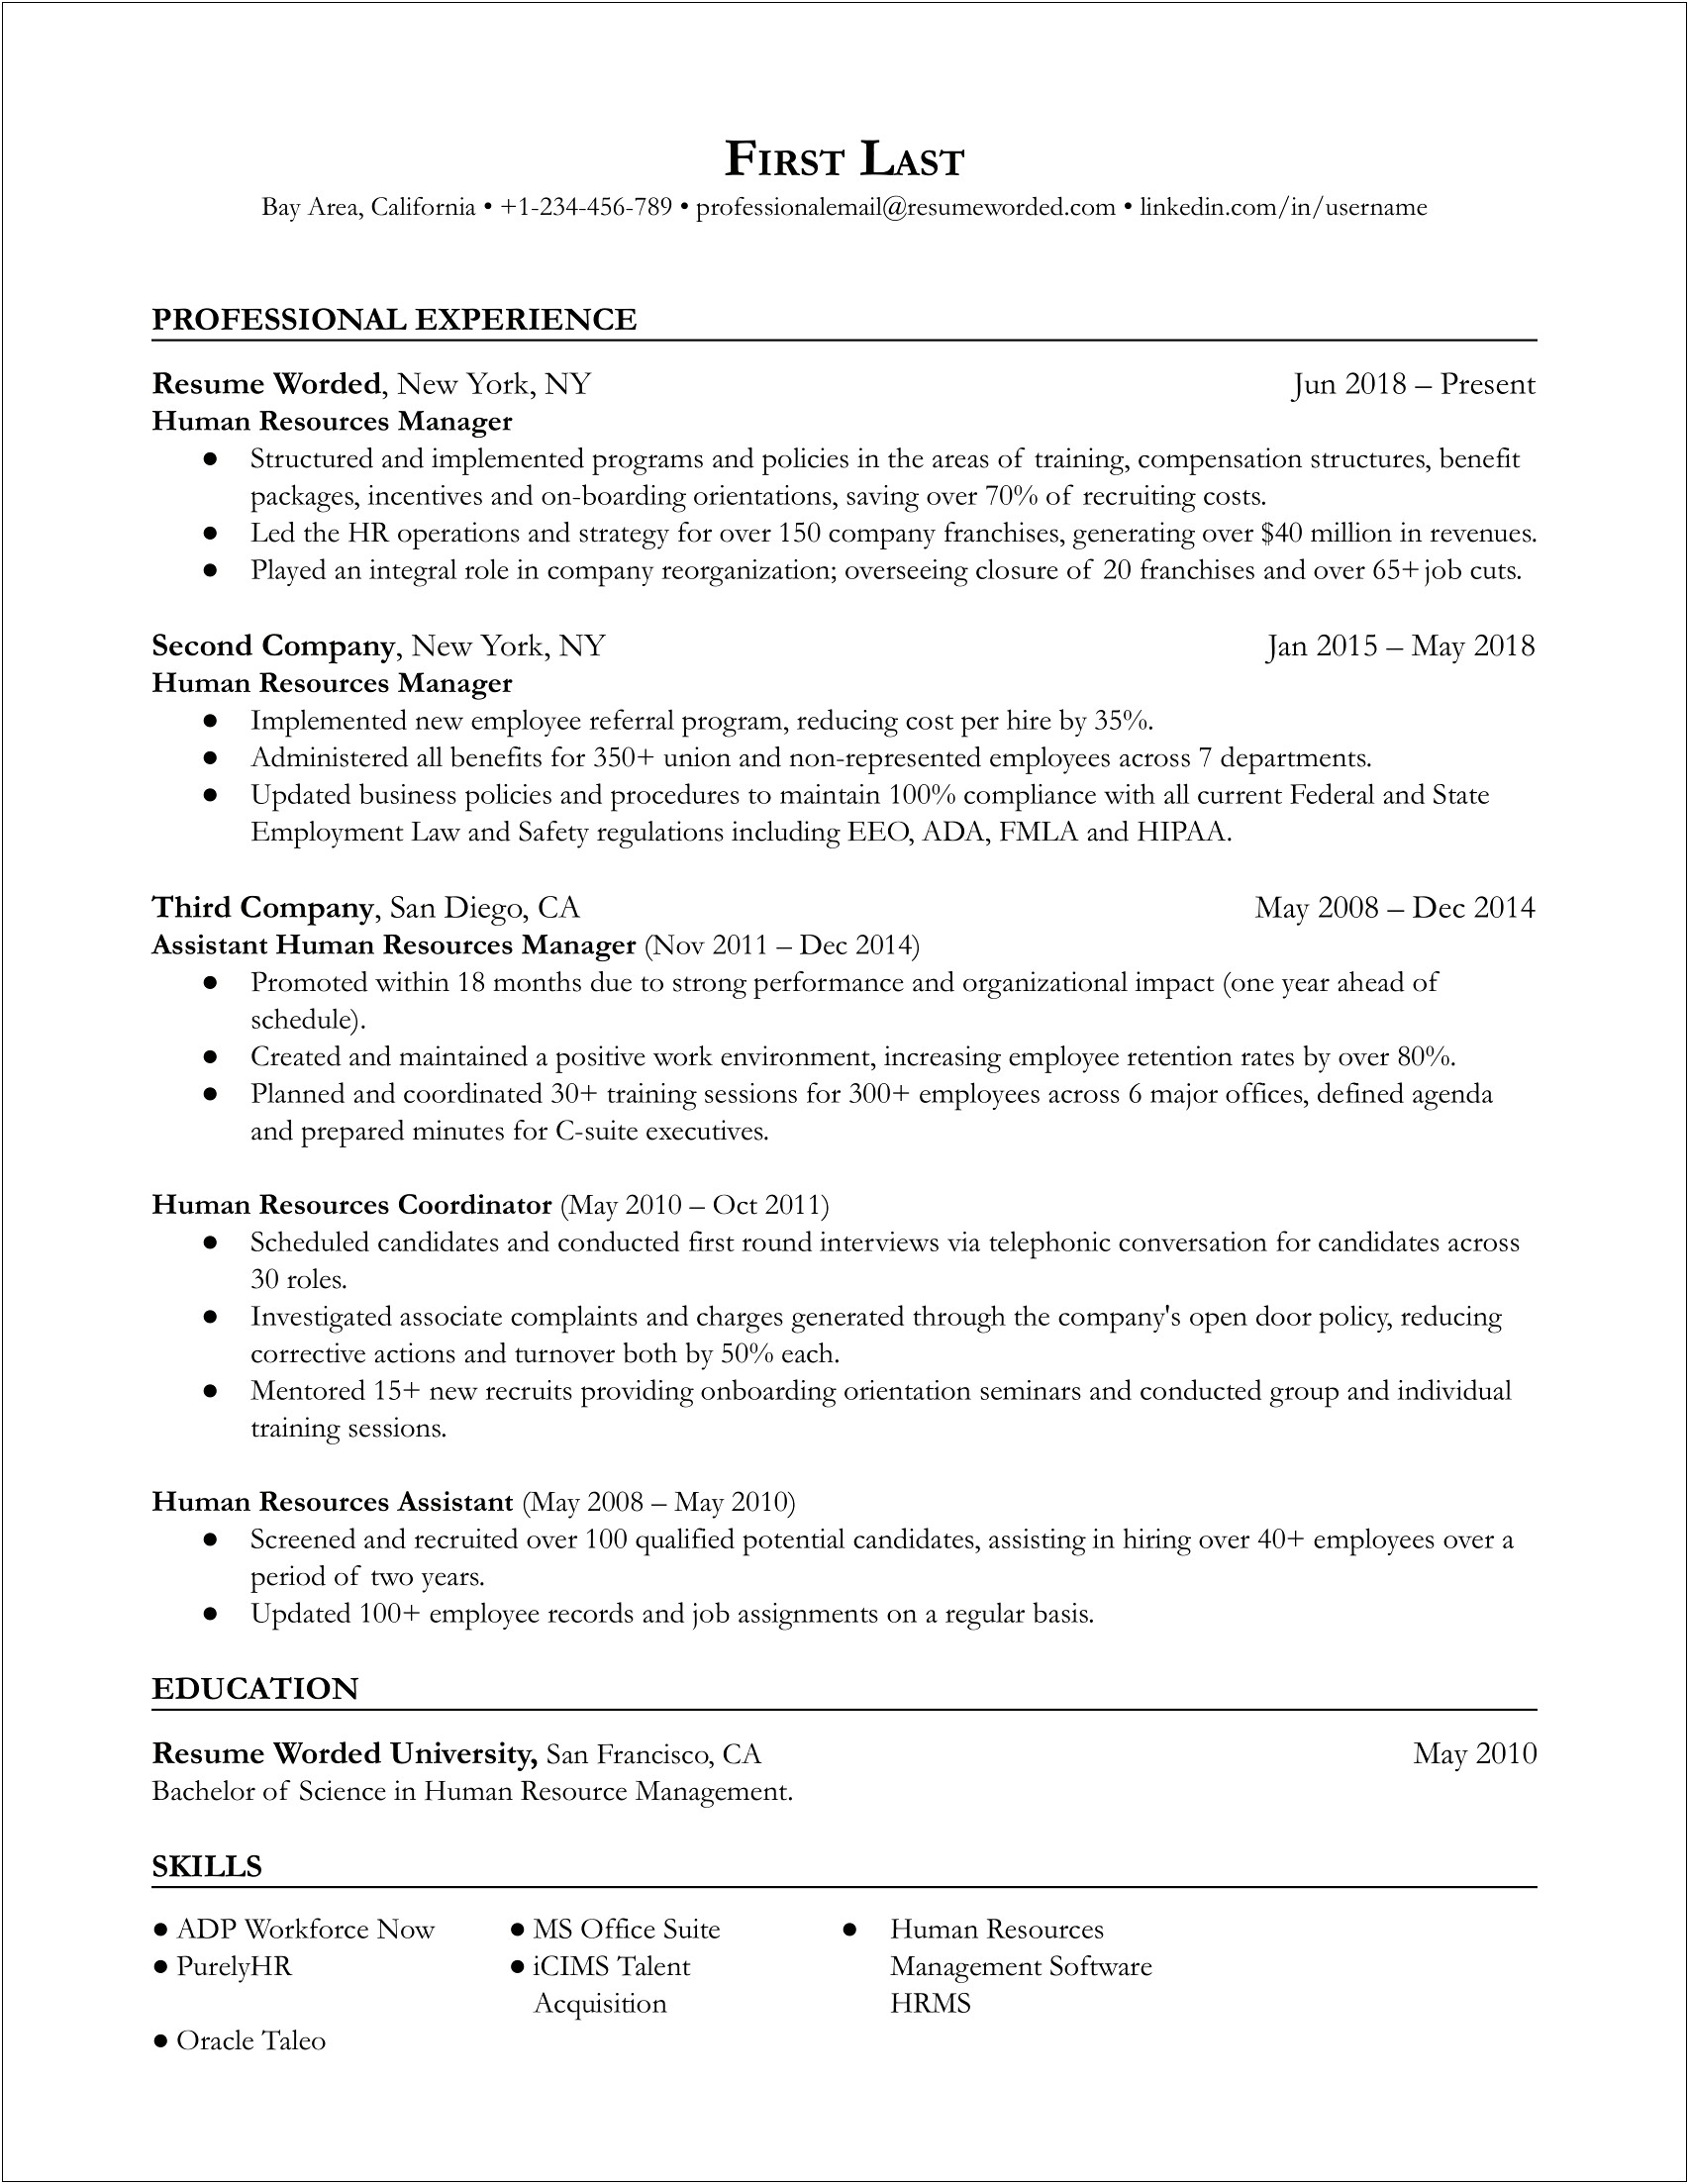 Human Resources Professional Resume Examples